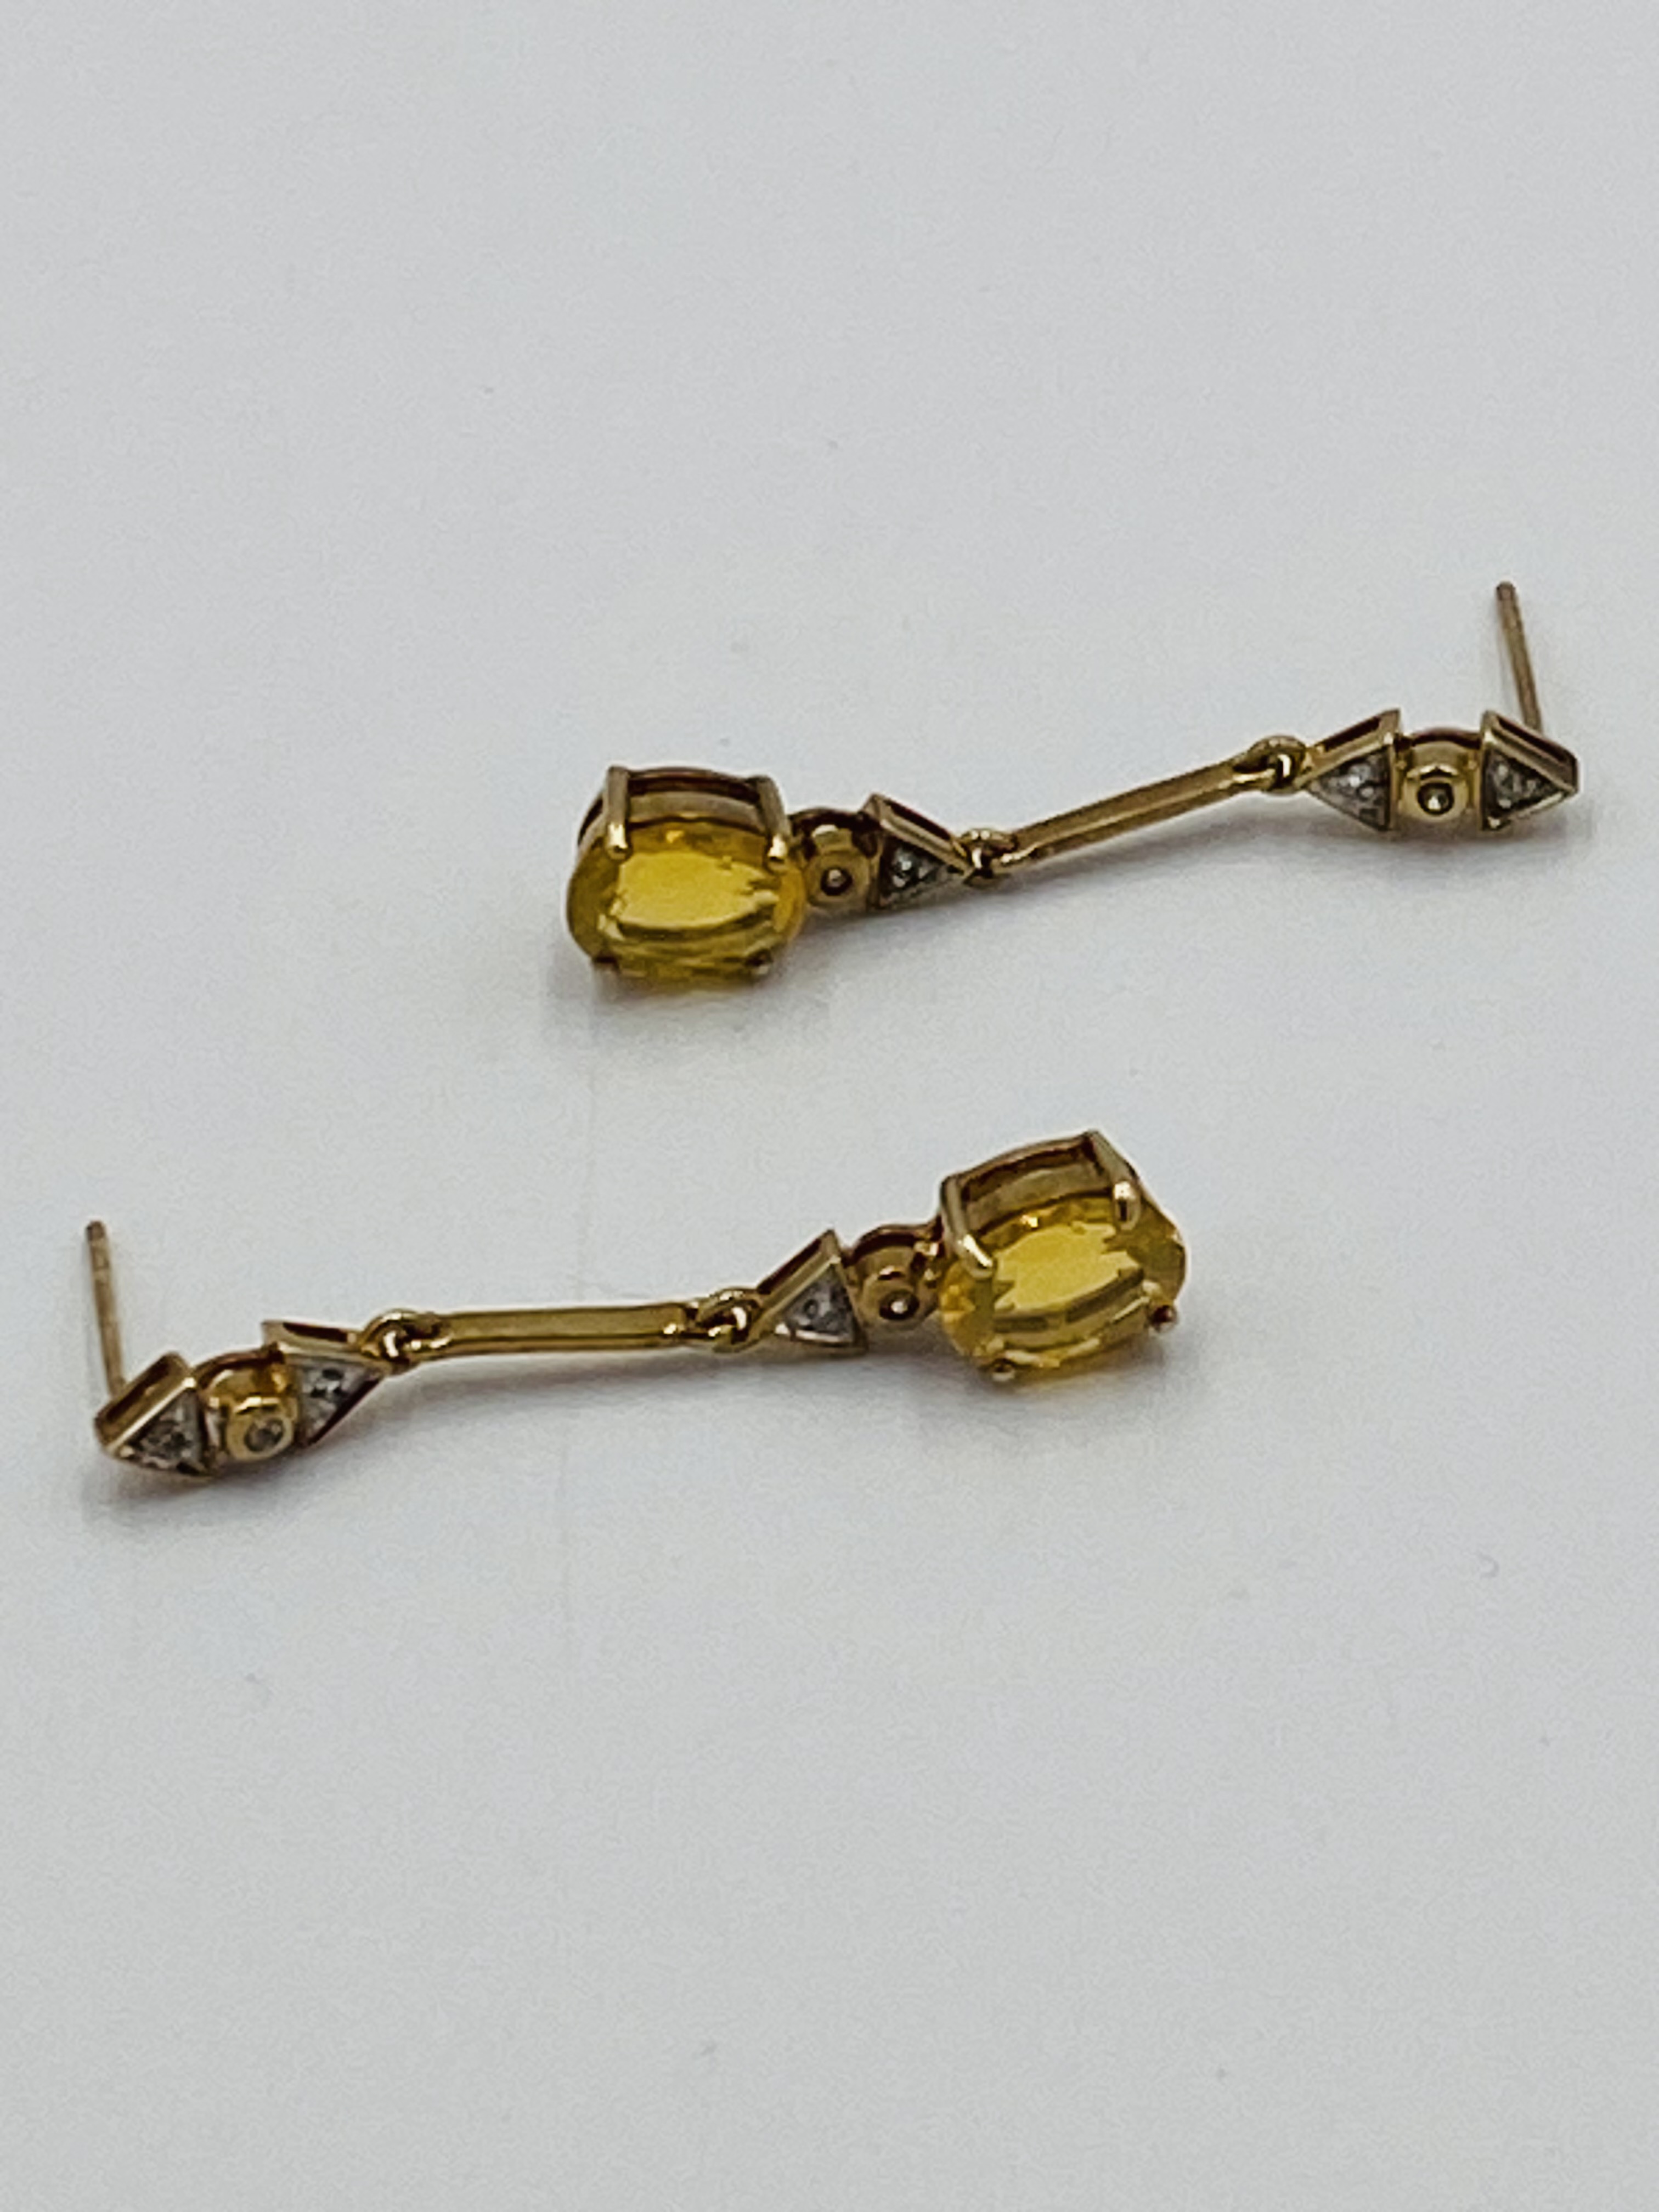 Pair of 9ct gold earrings - Image 2 of 6